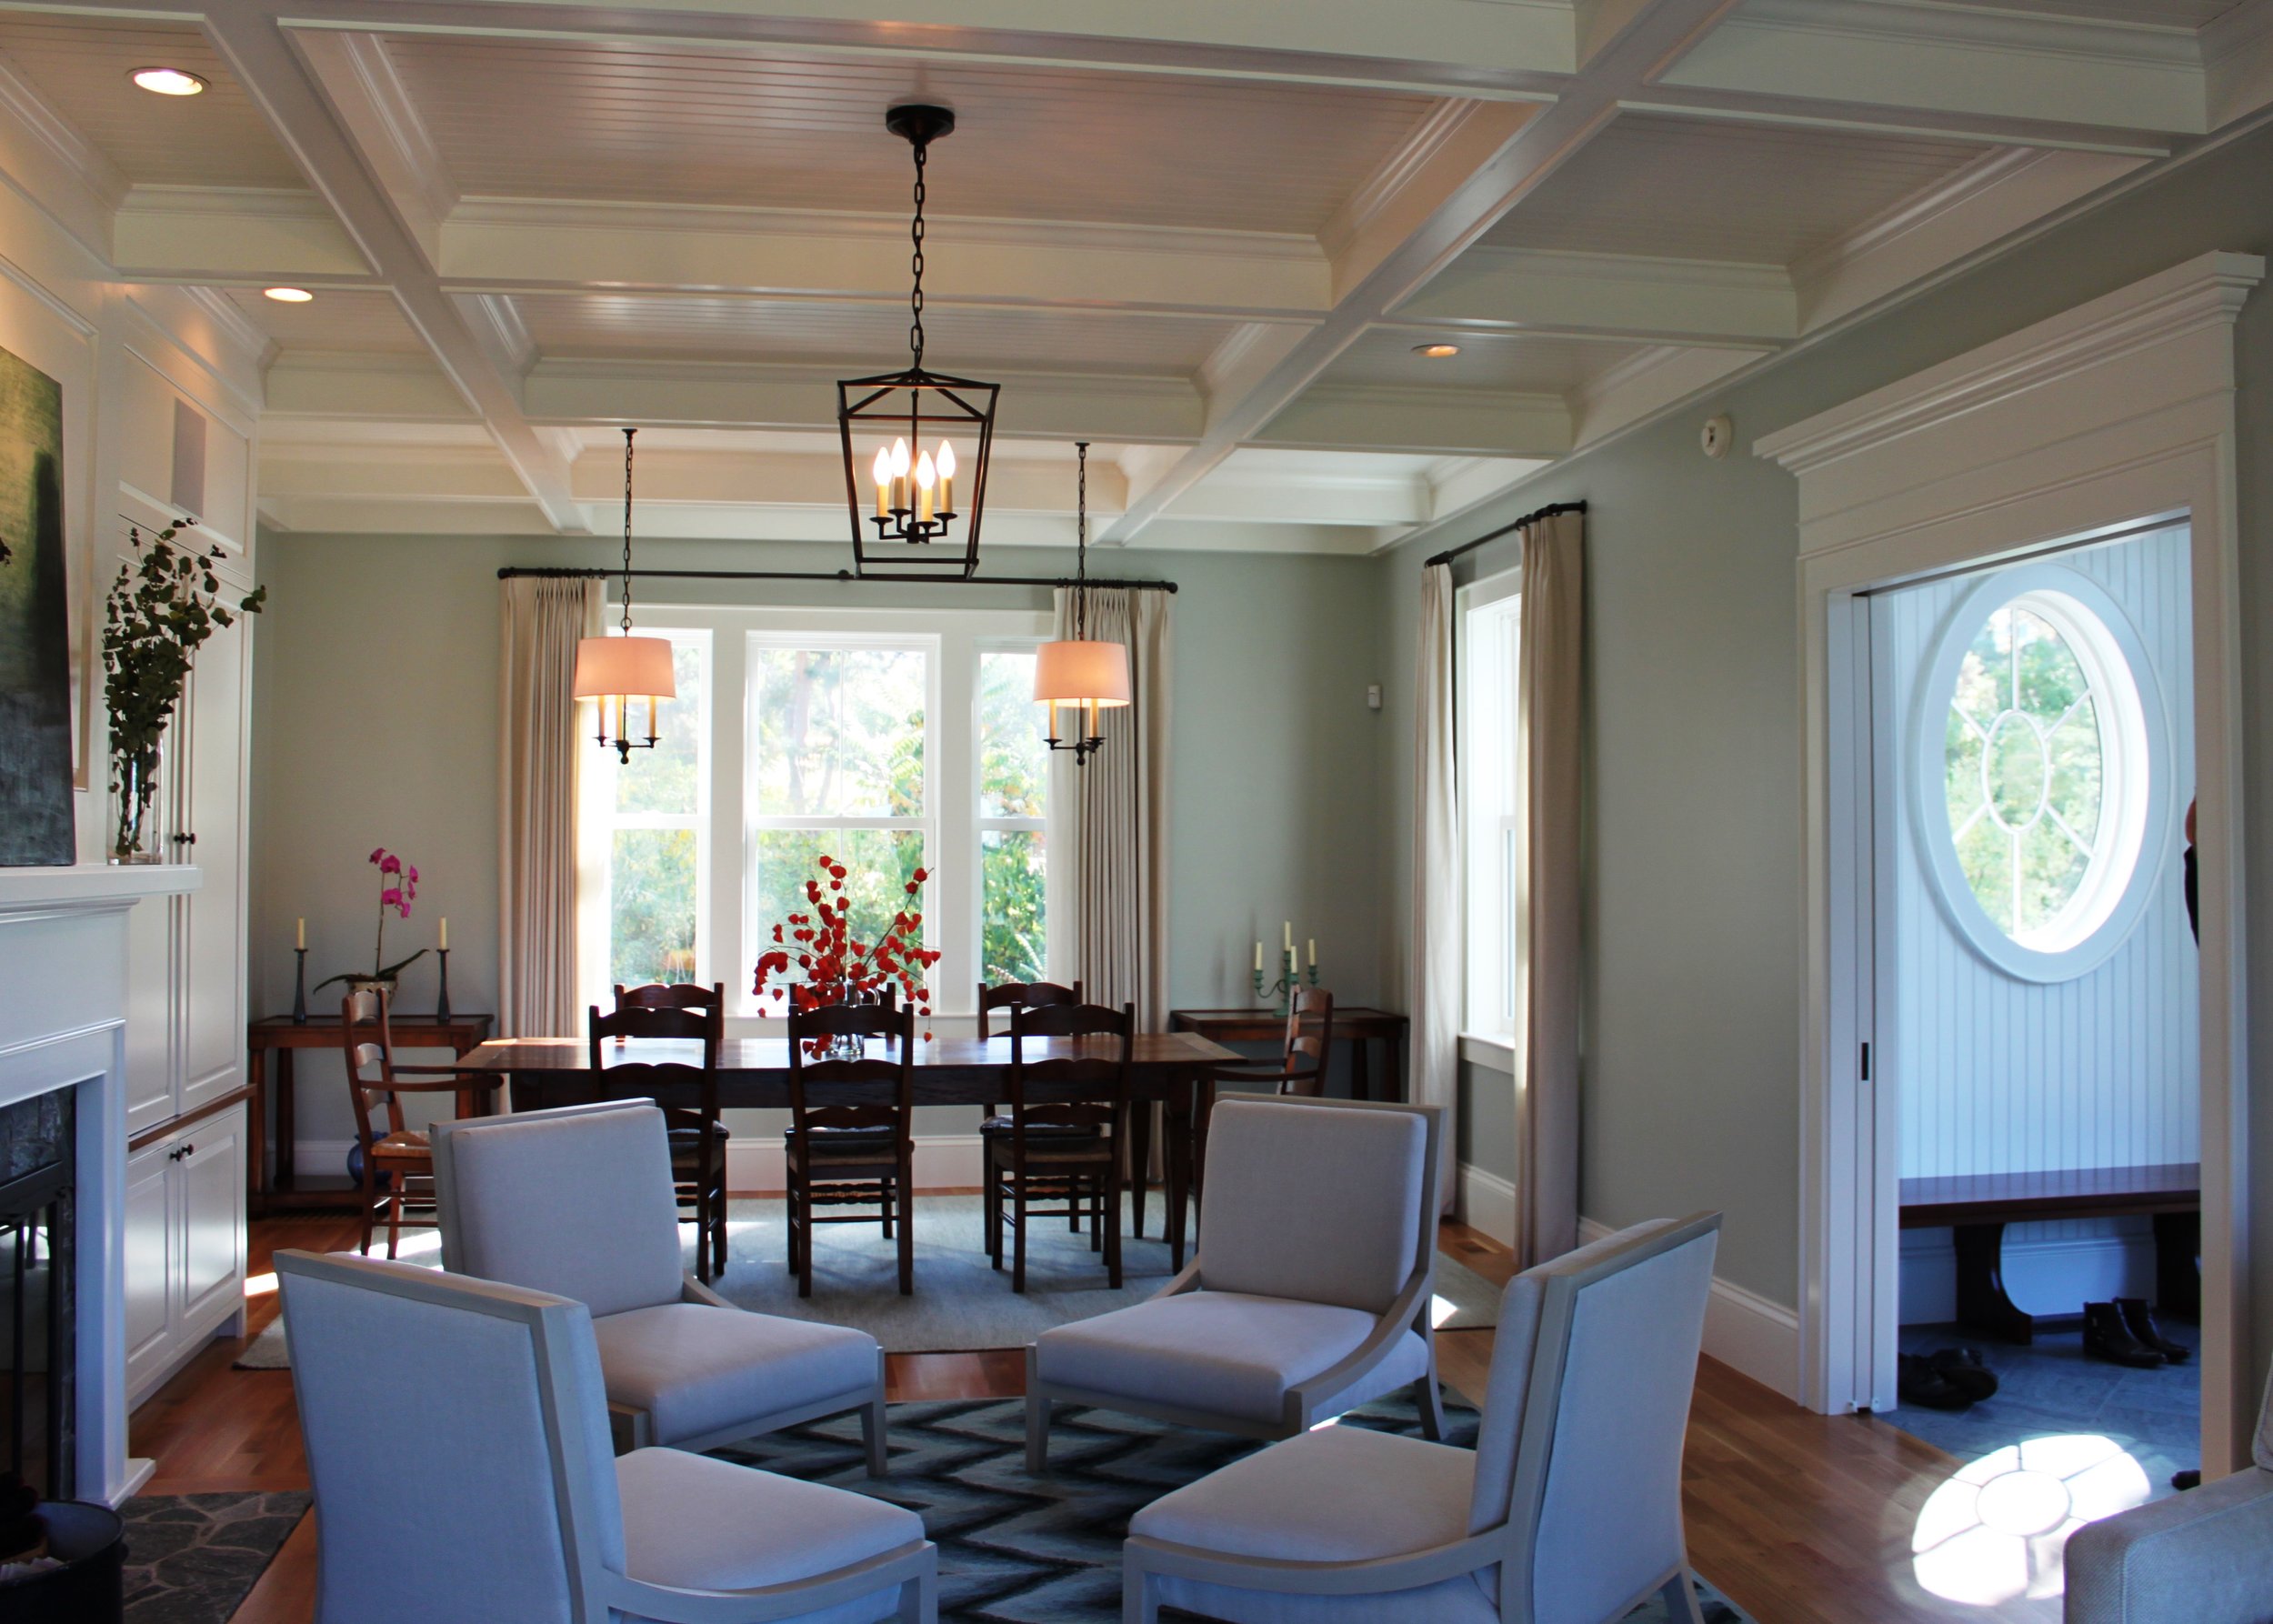 Dining room with beamed ceiling